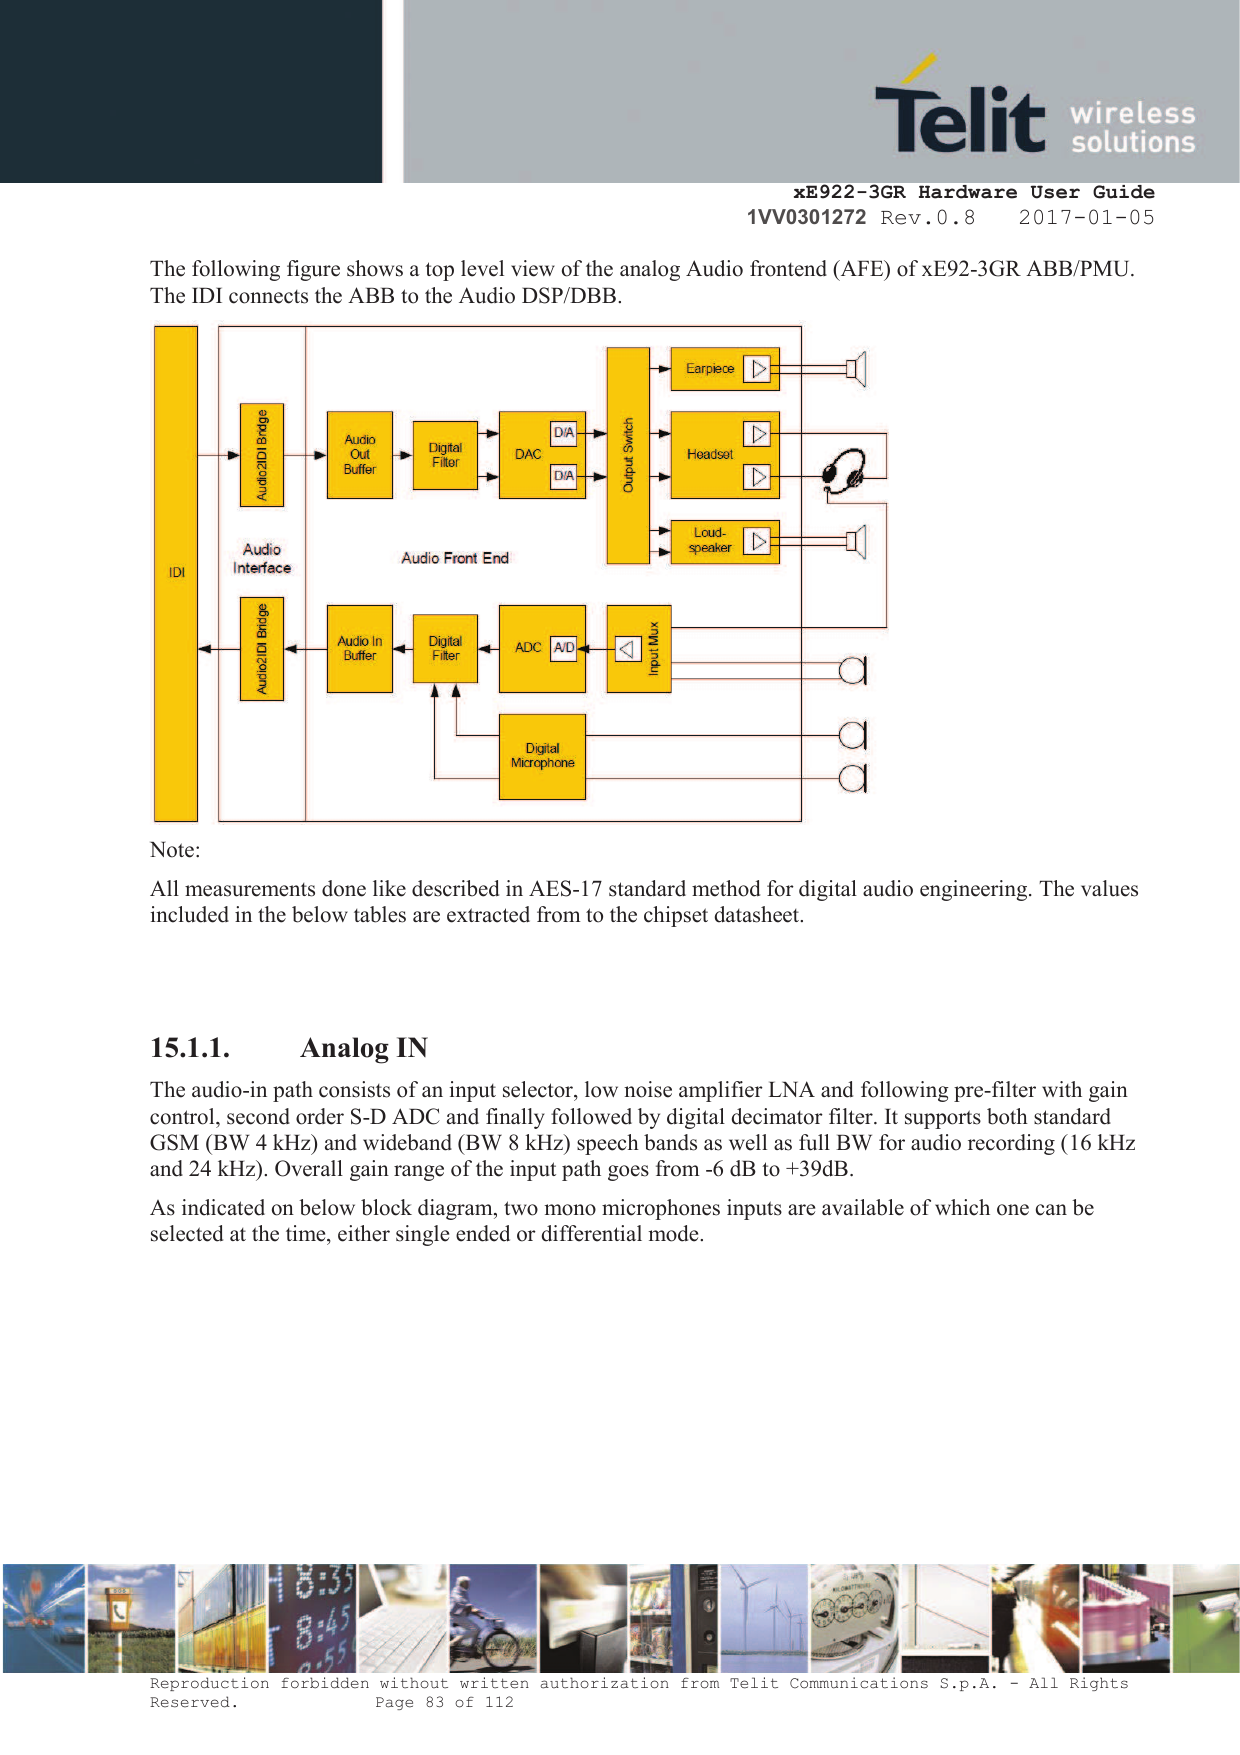     xE922-3GR Hardware User Guide 1VV0301272 Rev.0.8   2017-01-05 Reproduction forbidden without written authorization from Telit Communications S.p.A. - All Rights Reserved.    Page 83 of 112  The following figure shows a top level view of the analog Audio frontend (AFE) of xE92-3GR ABB/PMU. The IDI connects the ABB to the Audio DSP/DBB.  Note:  All measurements done like described in AES-17 standard method for digital audio engineering. The values included in the below tables are extracted from to the chipset datasheet.   15.1.1. Analog IN The audio-in path consists of an input selector, low noise amplifier LNA and following pre-filter with gain control, second order S-D ADC and finally followed by digital decimator filter. It supports both standard GSM (BW 4 kHz) and wideband (BW 8 kHz) speech bands as well as full BW for audio recording (16 kHz and 24 kHz). Overall gain range of the input path goes from -6 dB to +39dB.  As indicated on below block diagram, two mono microphones inputs are available of which one can be selected at the time, either single ended or differential mode.  